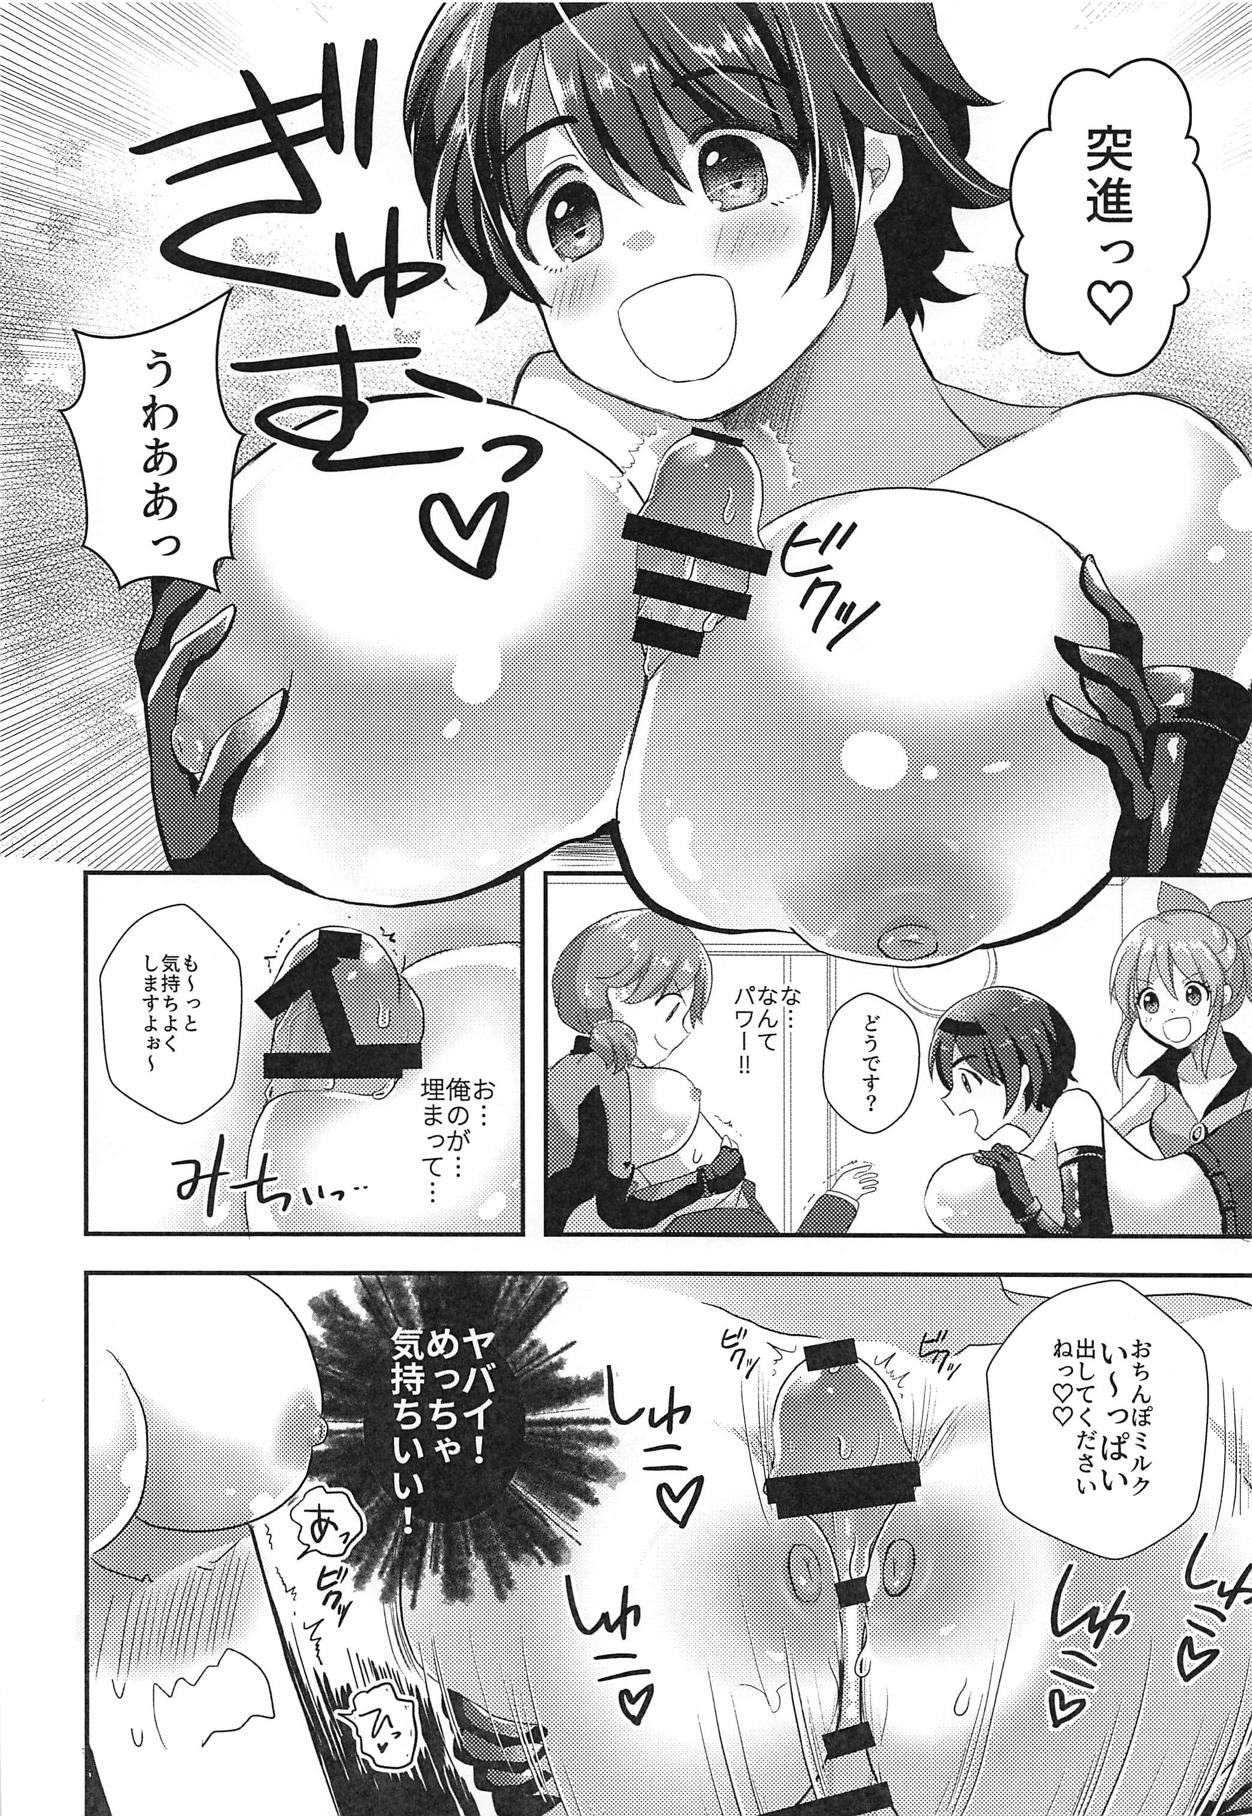 Village Usamin o Sukue! Sexy Guilty - The idolmaster Flagra - Page 9